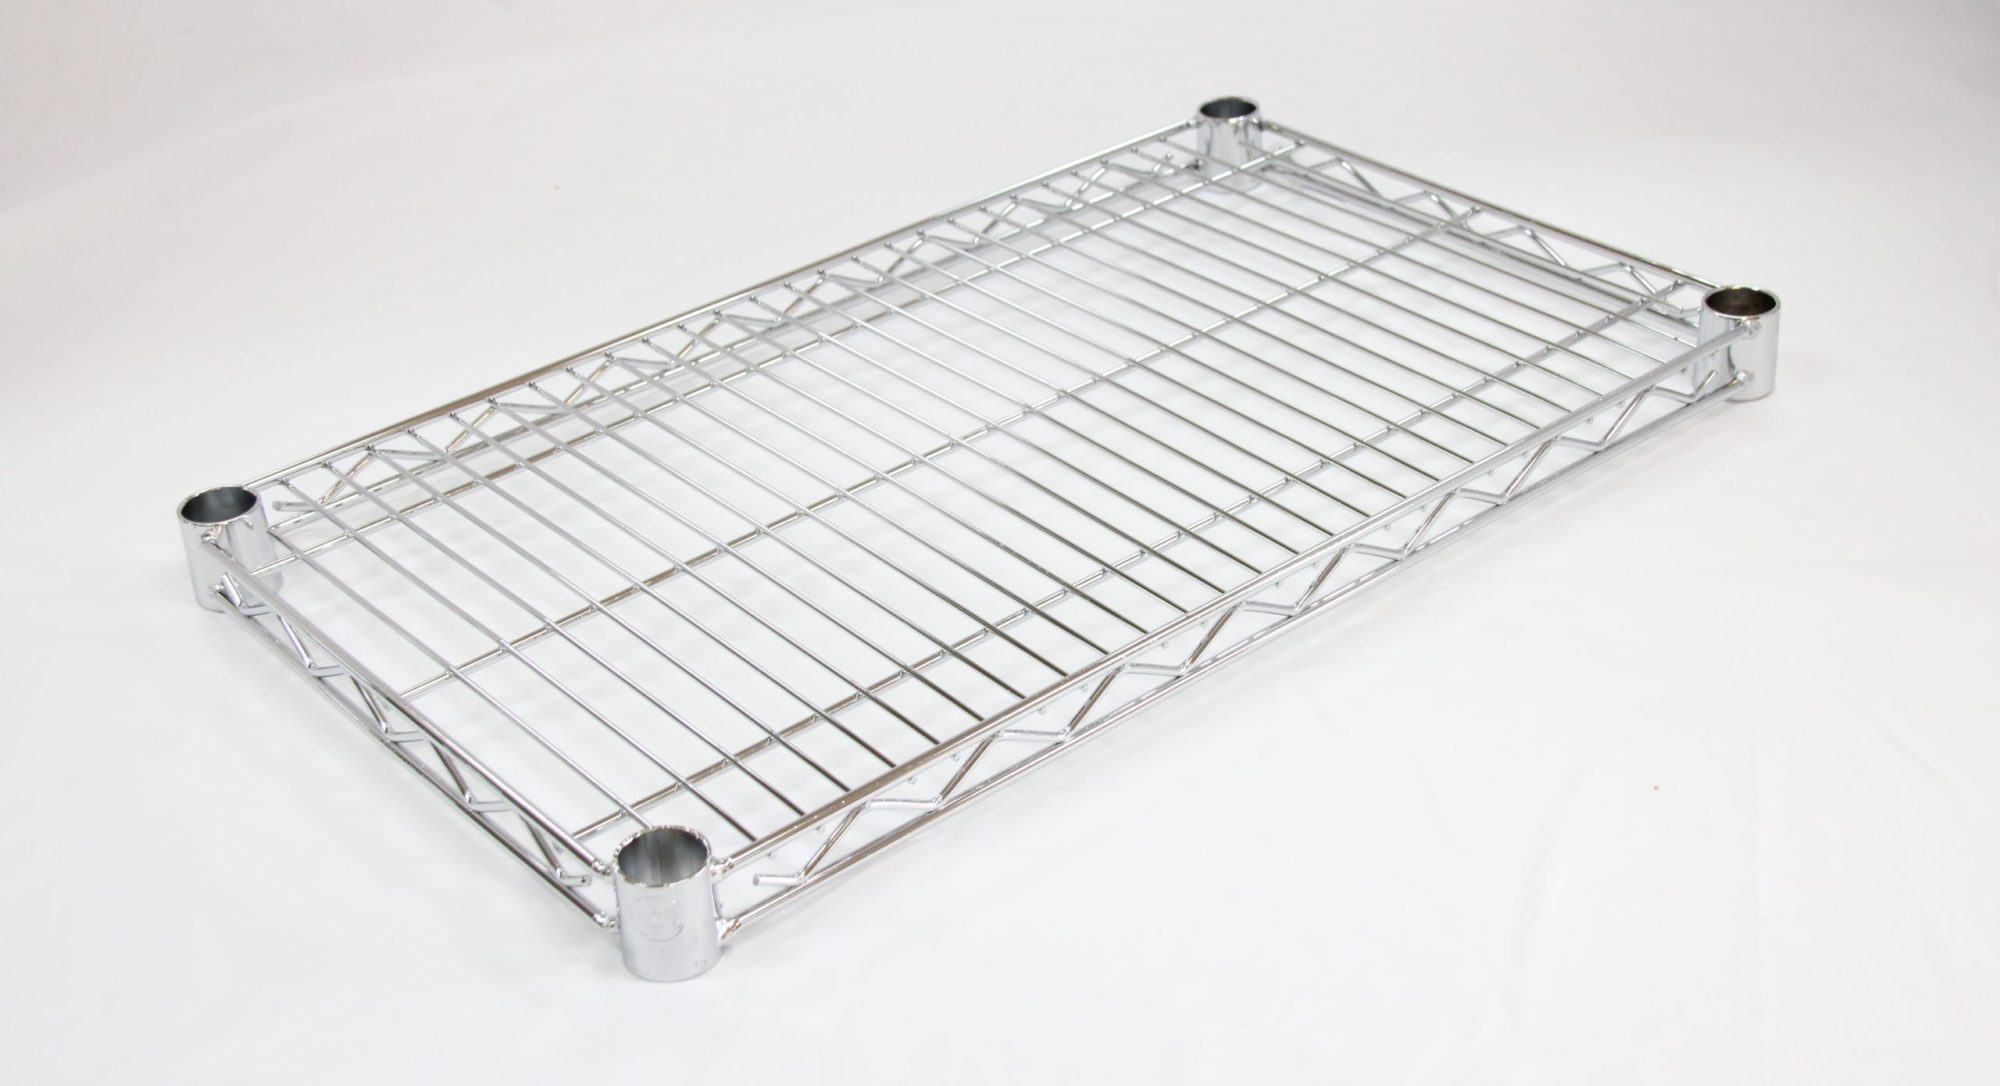 Omcan Wire Mesh Shelving 18" x 48" 20110 Chrome 2 Pack-S1848C